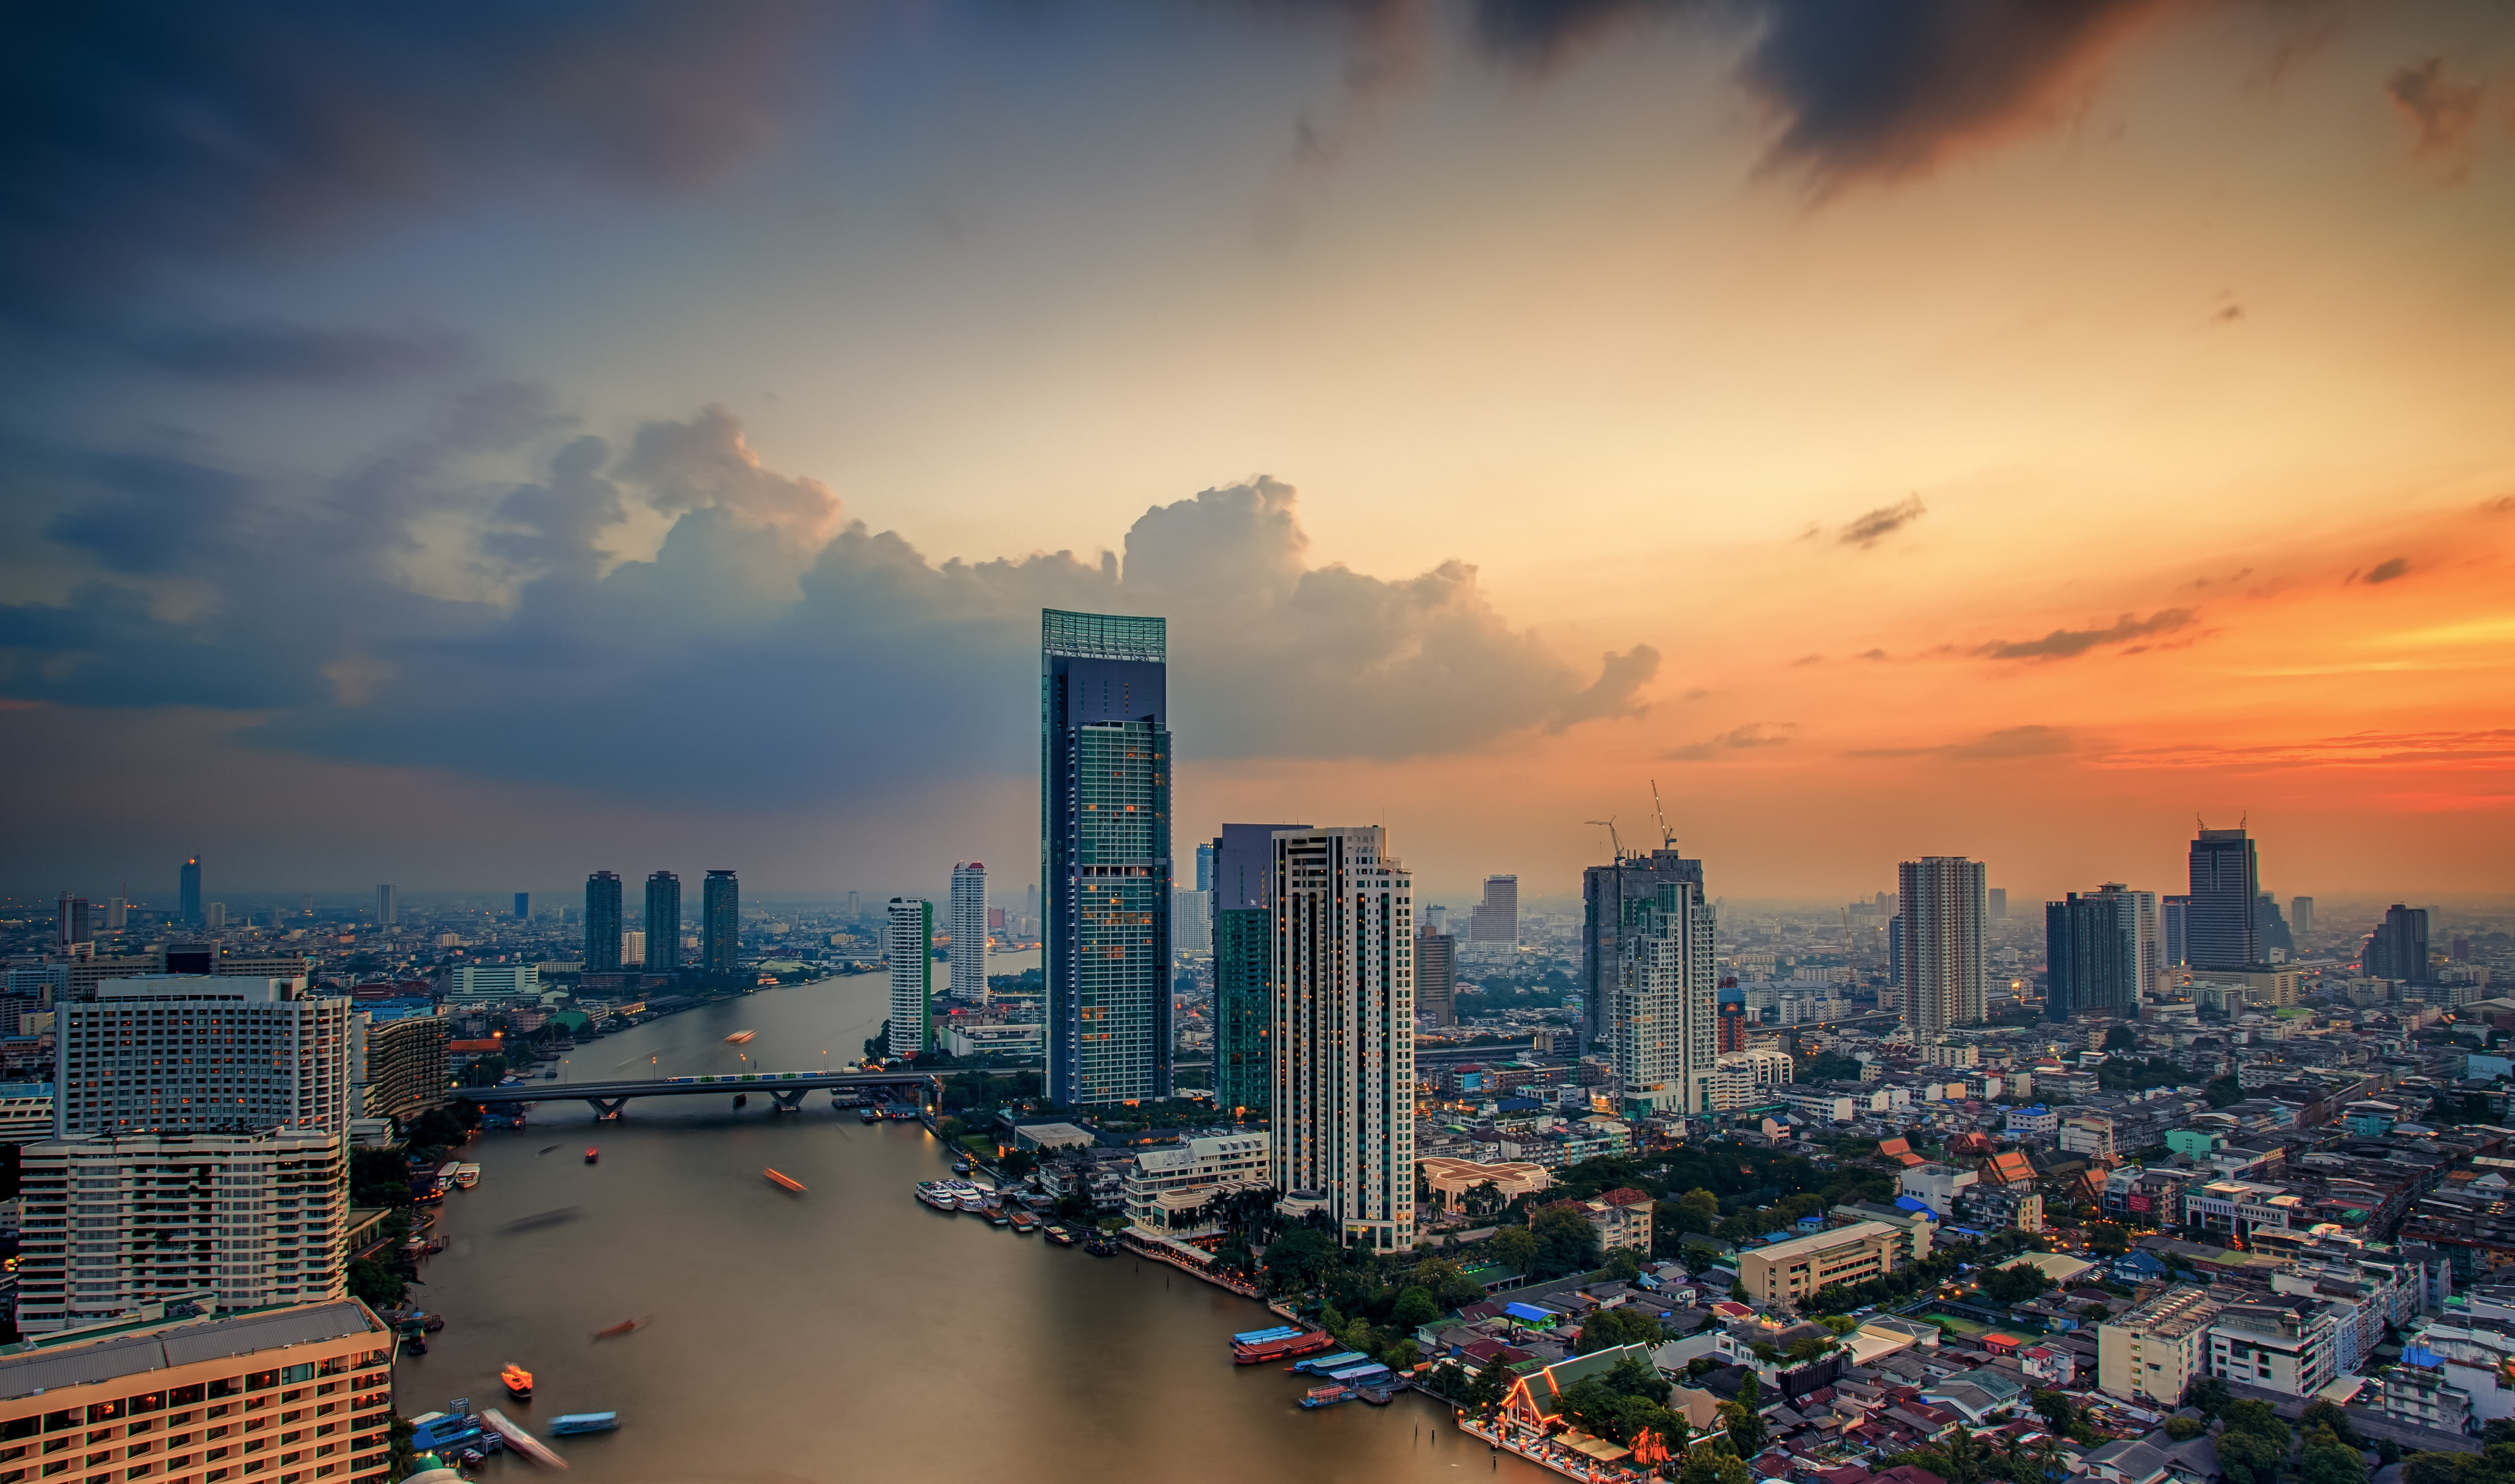 Thailand, architecture, building, clouds, town, river, Bangkok